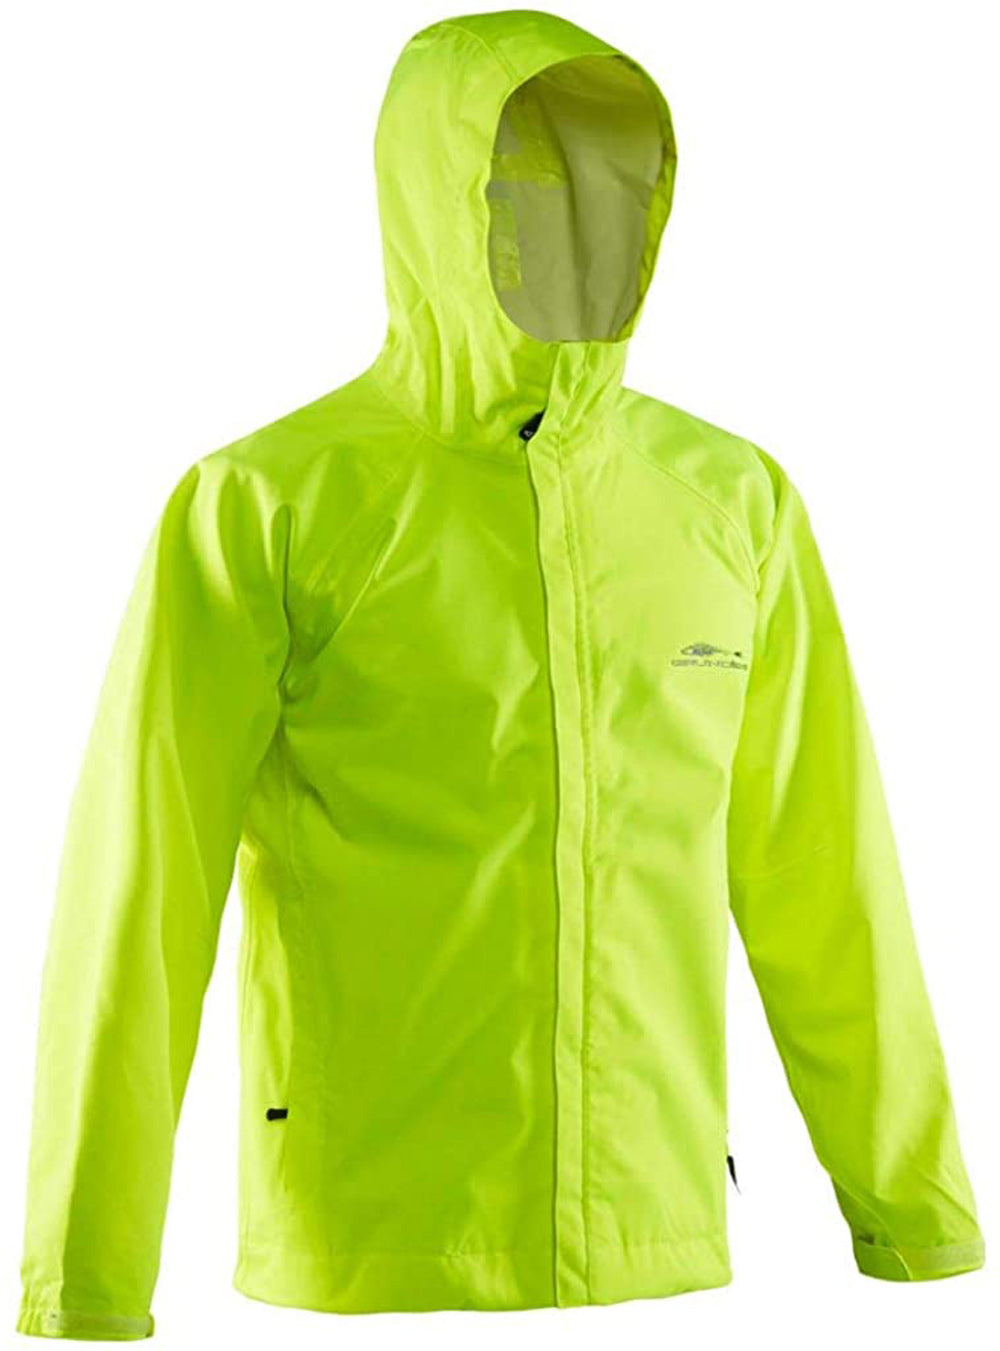 Weather Watch Jacket in Hi Vis Yellow color from the front view